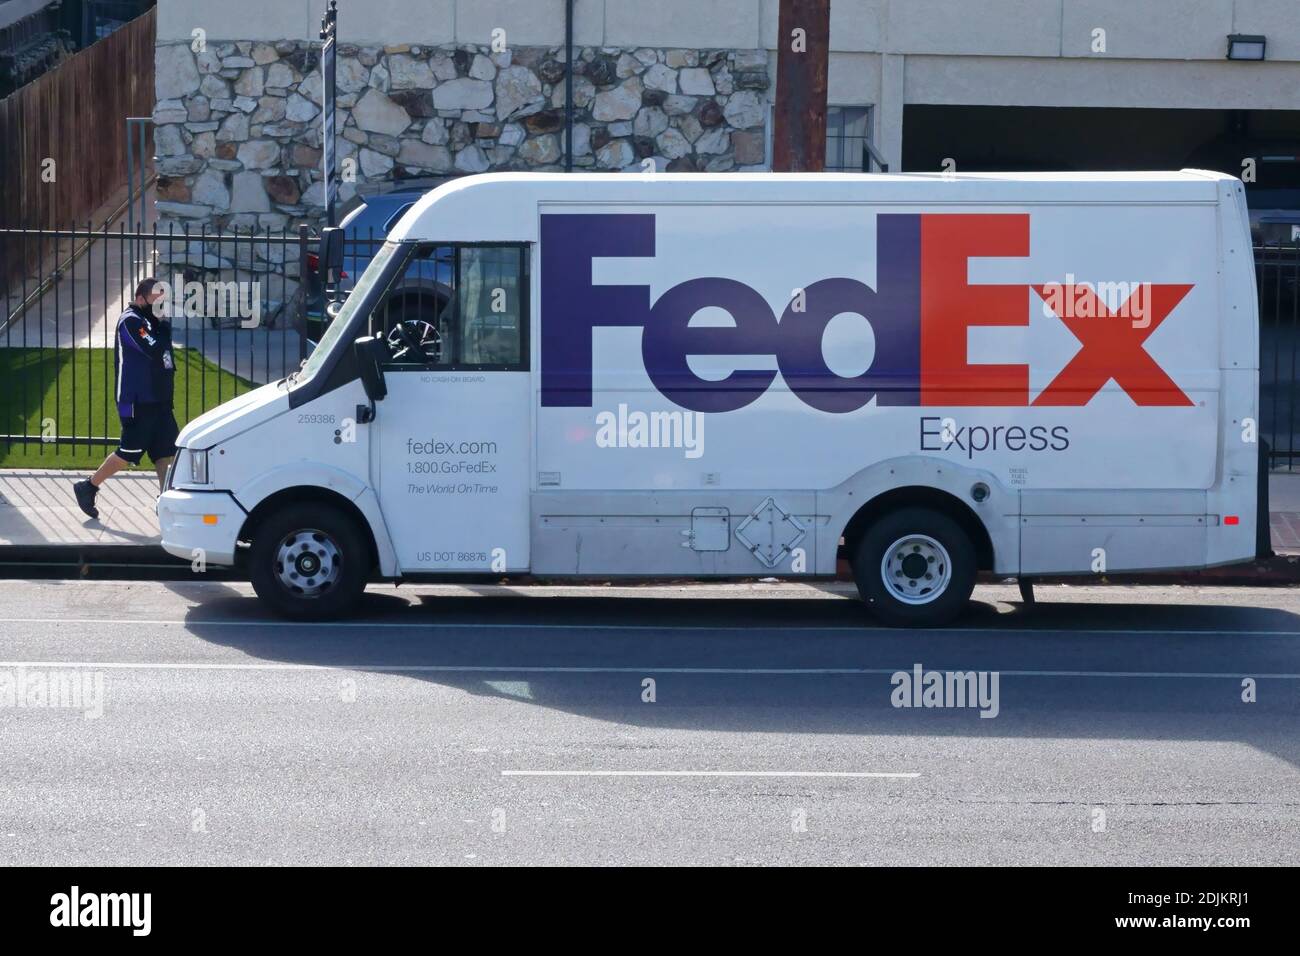 Los Angeles, CA / USA - Dec. 10, 2020: A FedEx Express diesel delivery work truck, built as an Isuzu Reach, is shown parked on a city street. Stock Photo